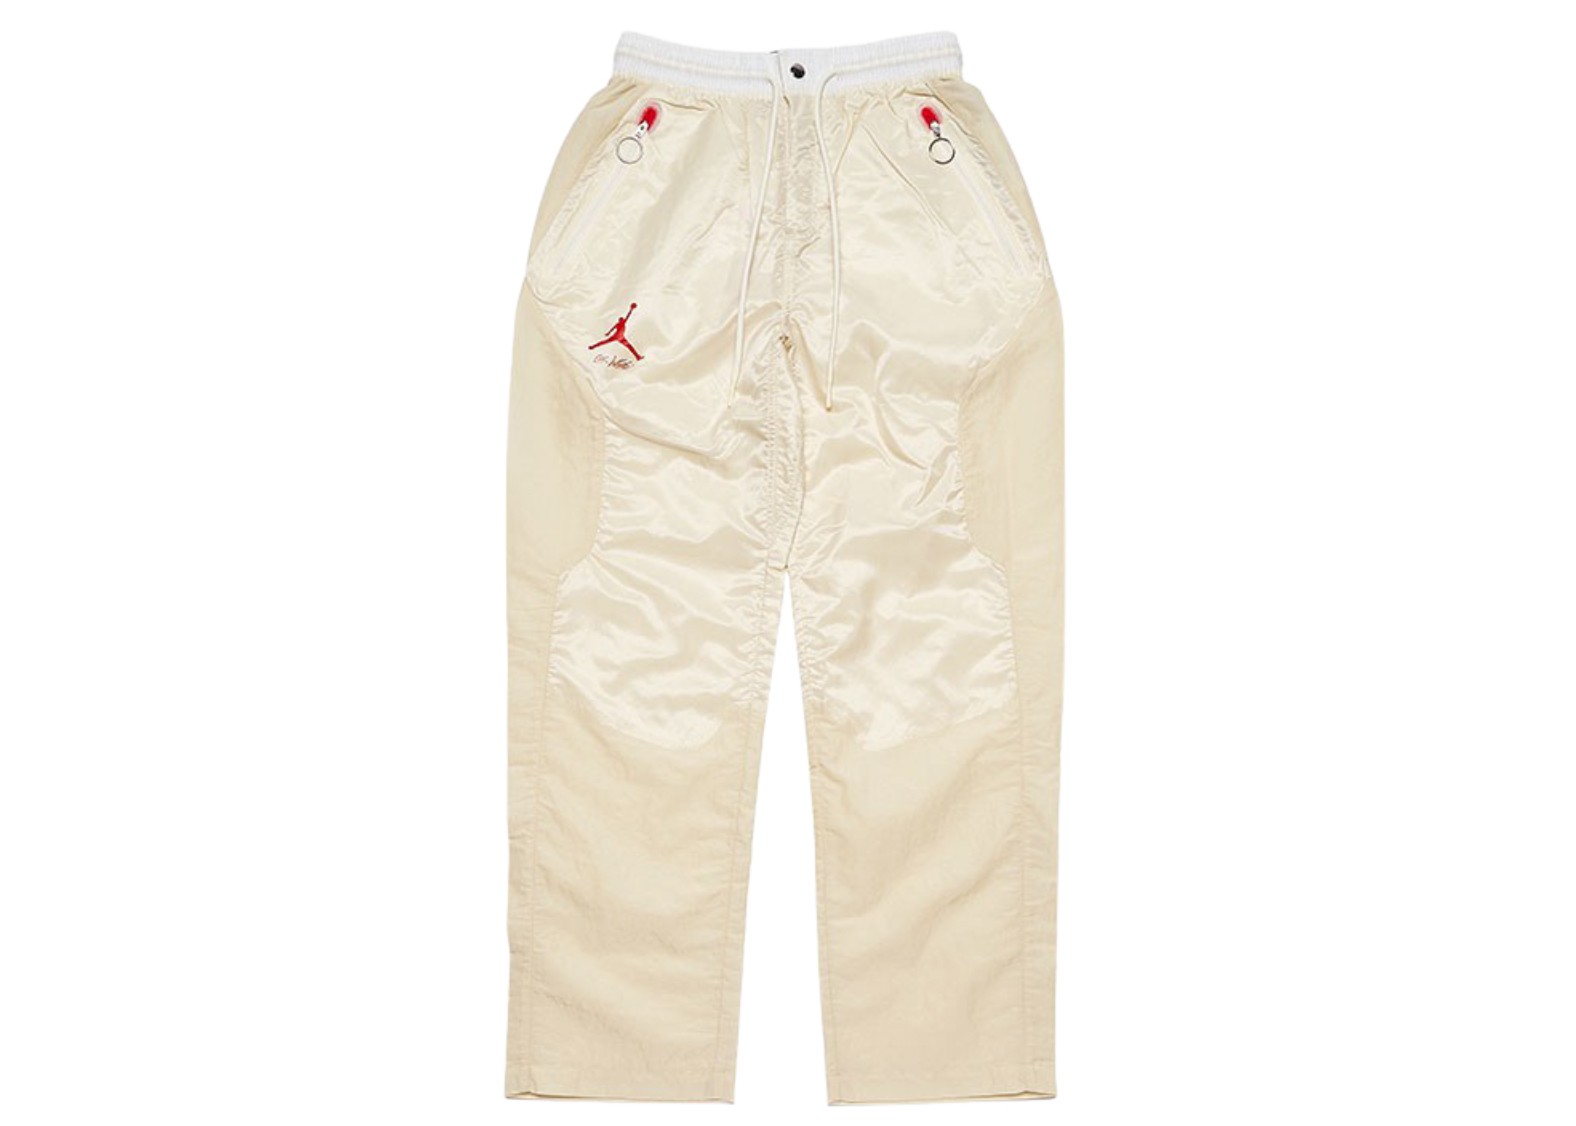 Buy Off White Trousers & Pants for Women by GAP Online | Ajio.com